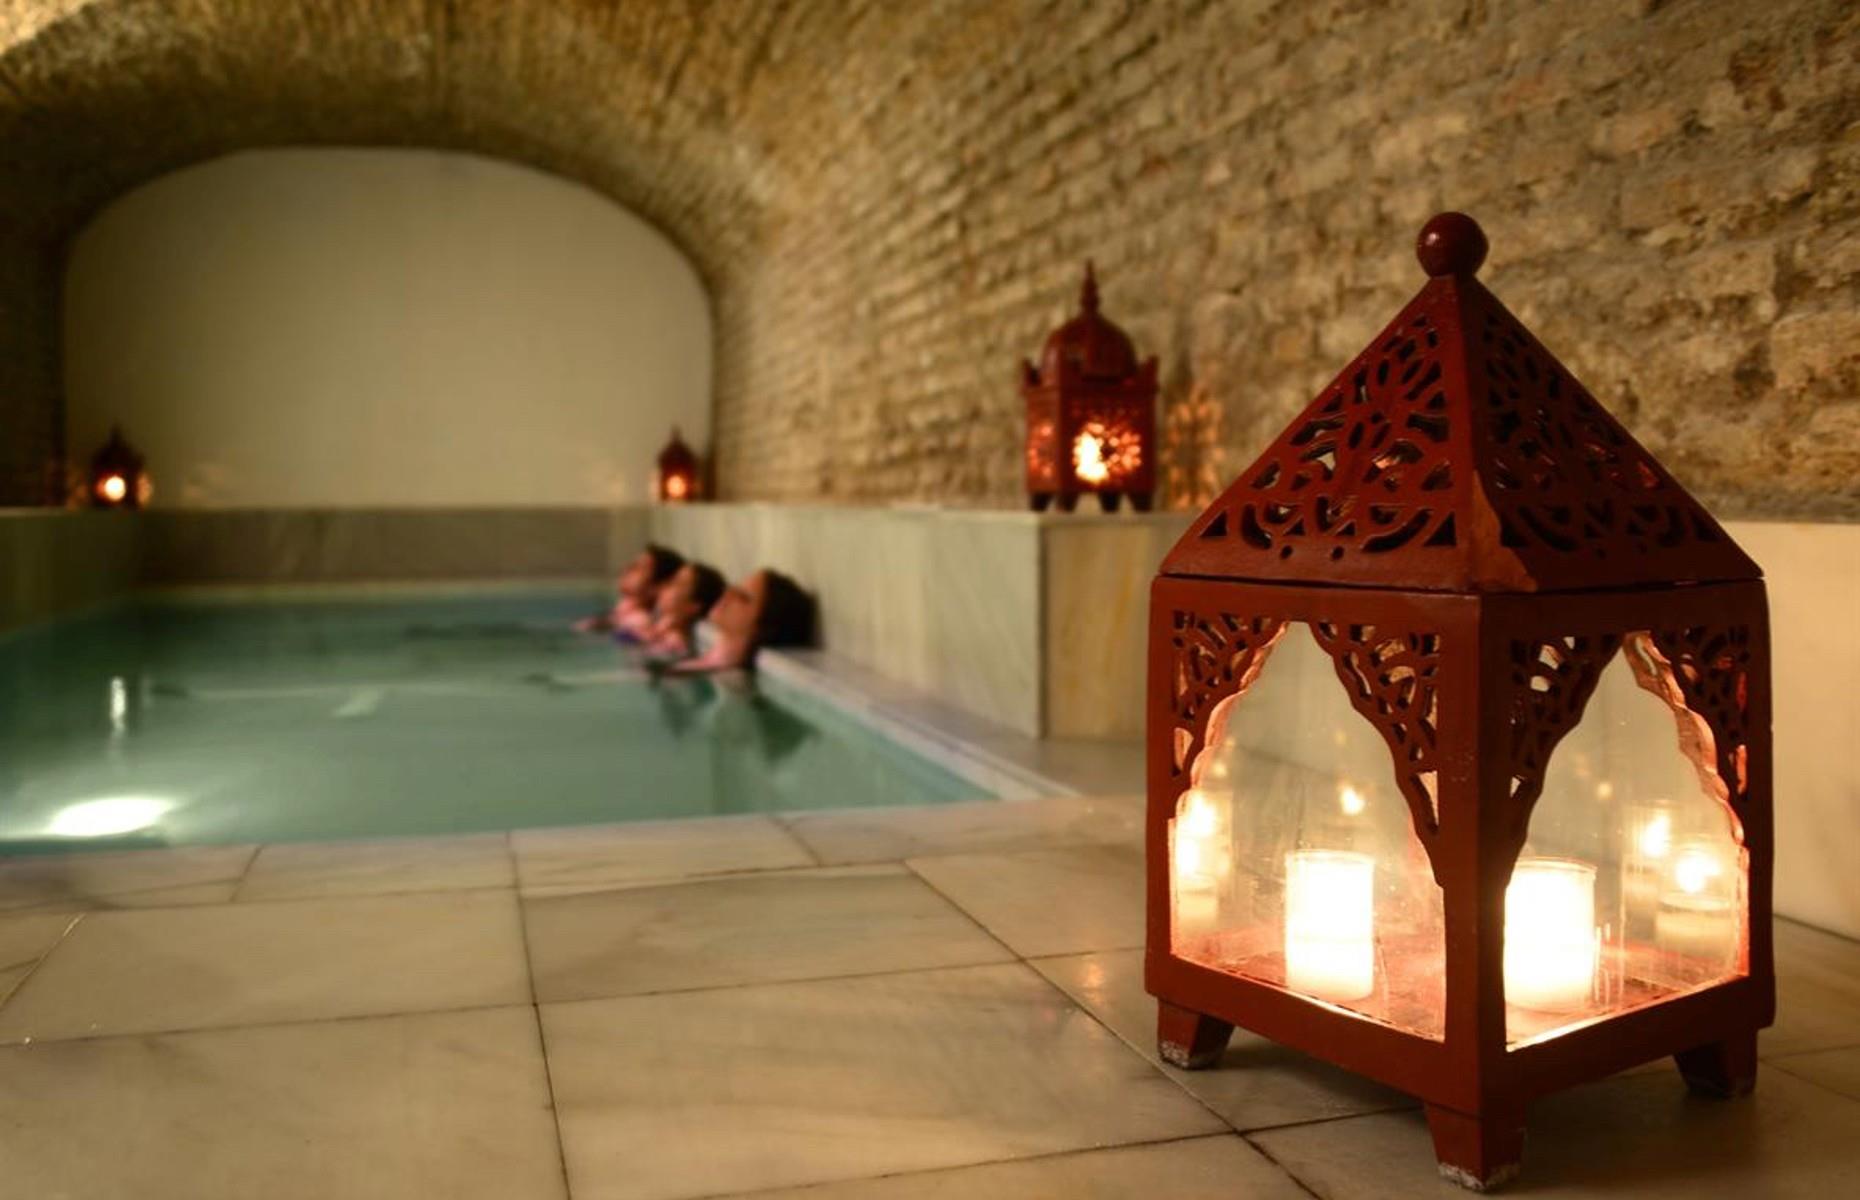 <p>Ever wanted to bathe in wine? Turns out you can, at <a href="https://beaire.com/index.php?q=en">AIRE Ancient Wine Baths</a> in the heart of New York City. This tranquil spa, inspired by Roman, Greek and Ottoman traditions, offers a “wine bath experience” for two, which involves a 30-minute soak in Spanish Ribera del Duero red – enjoying their supposed antioxidant benefits – before enjoying an hour-long grapeseed oil massage.</p>